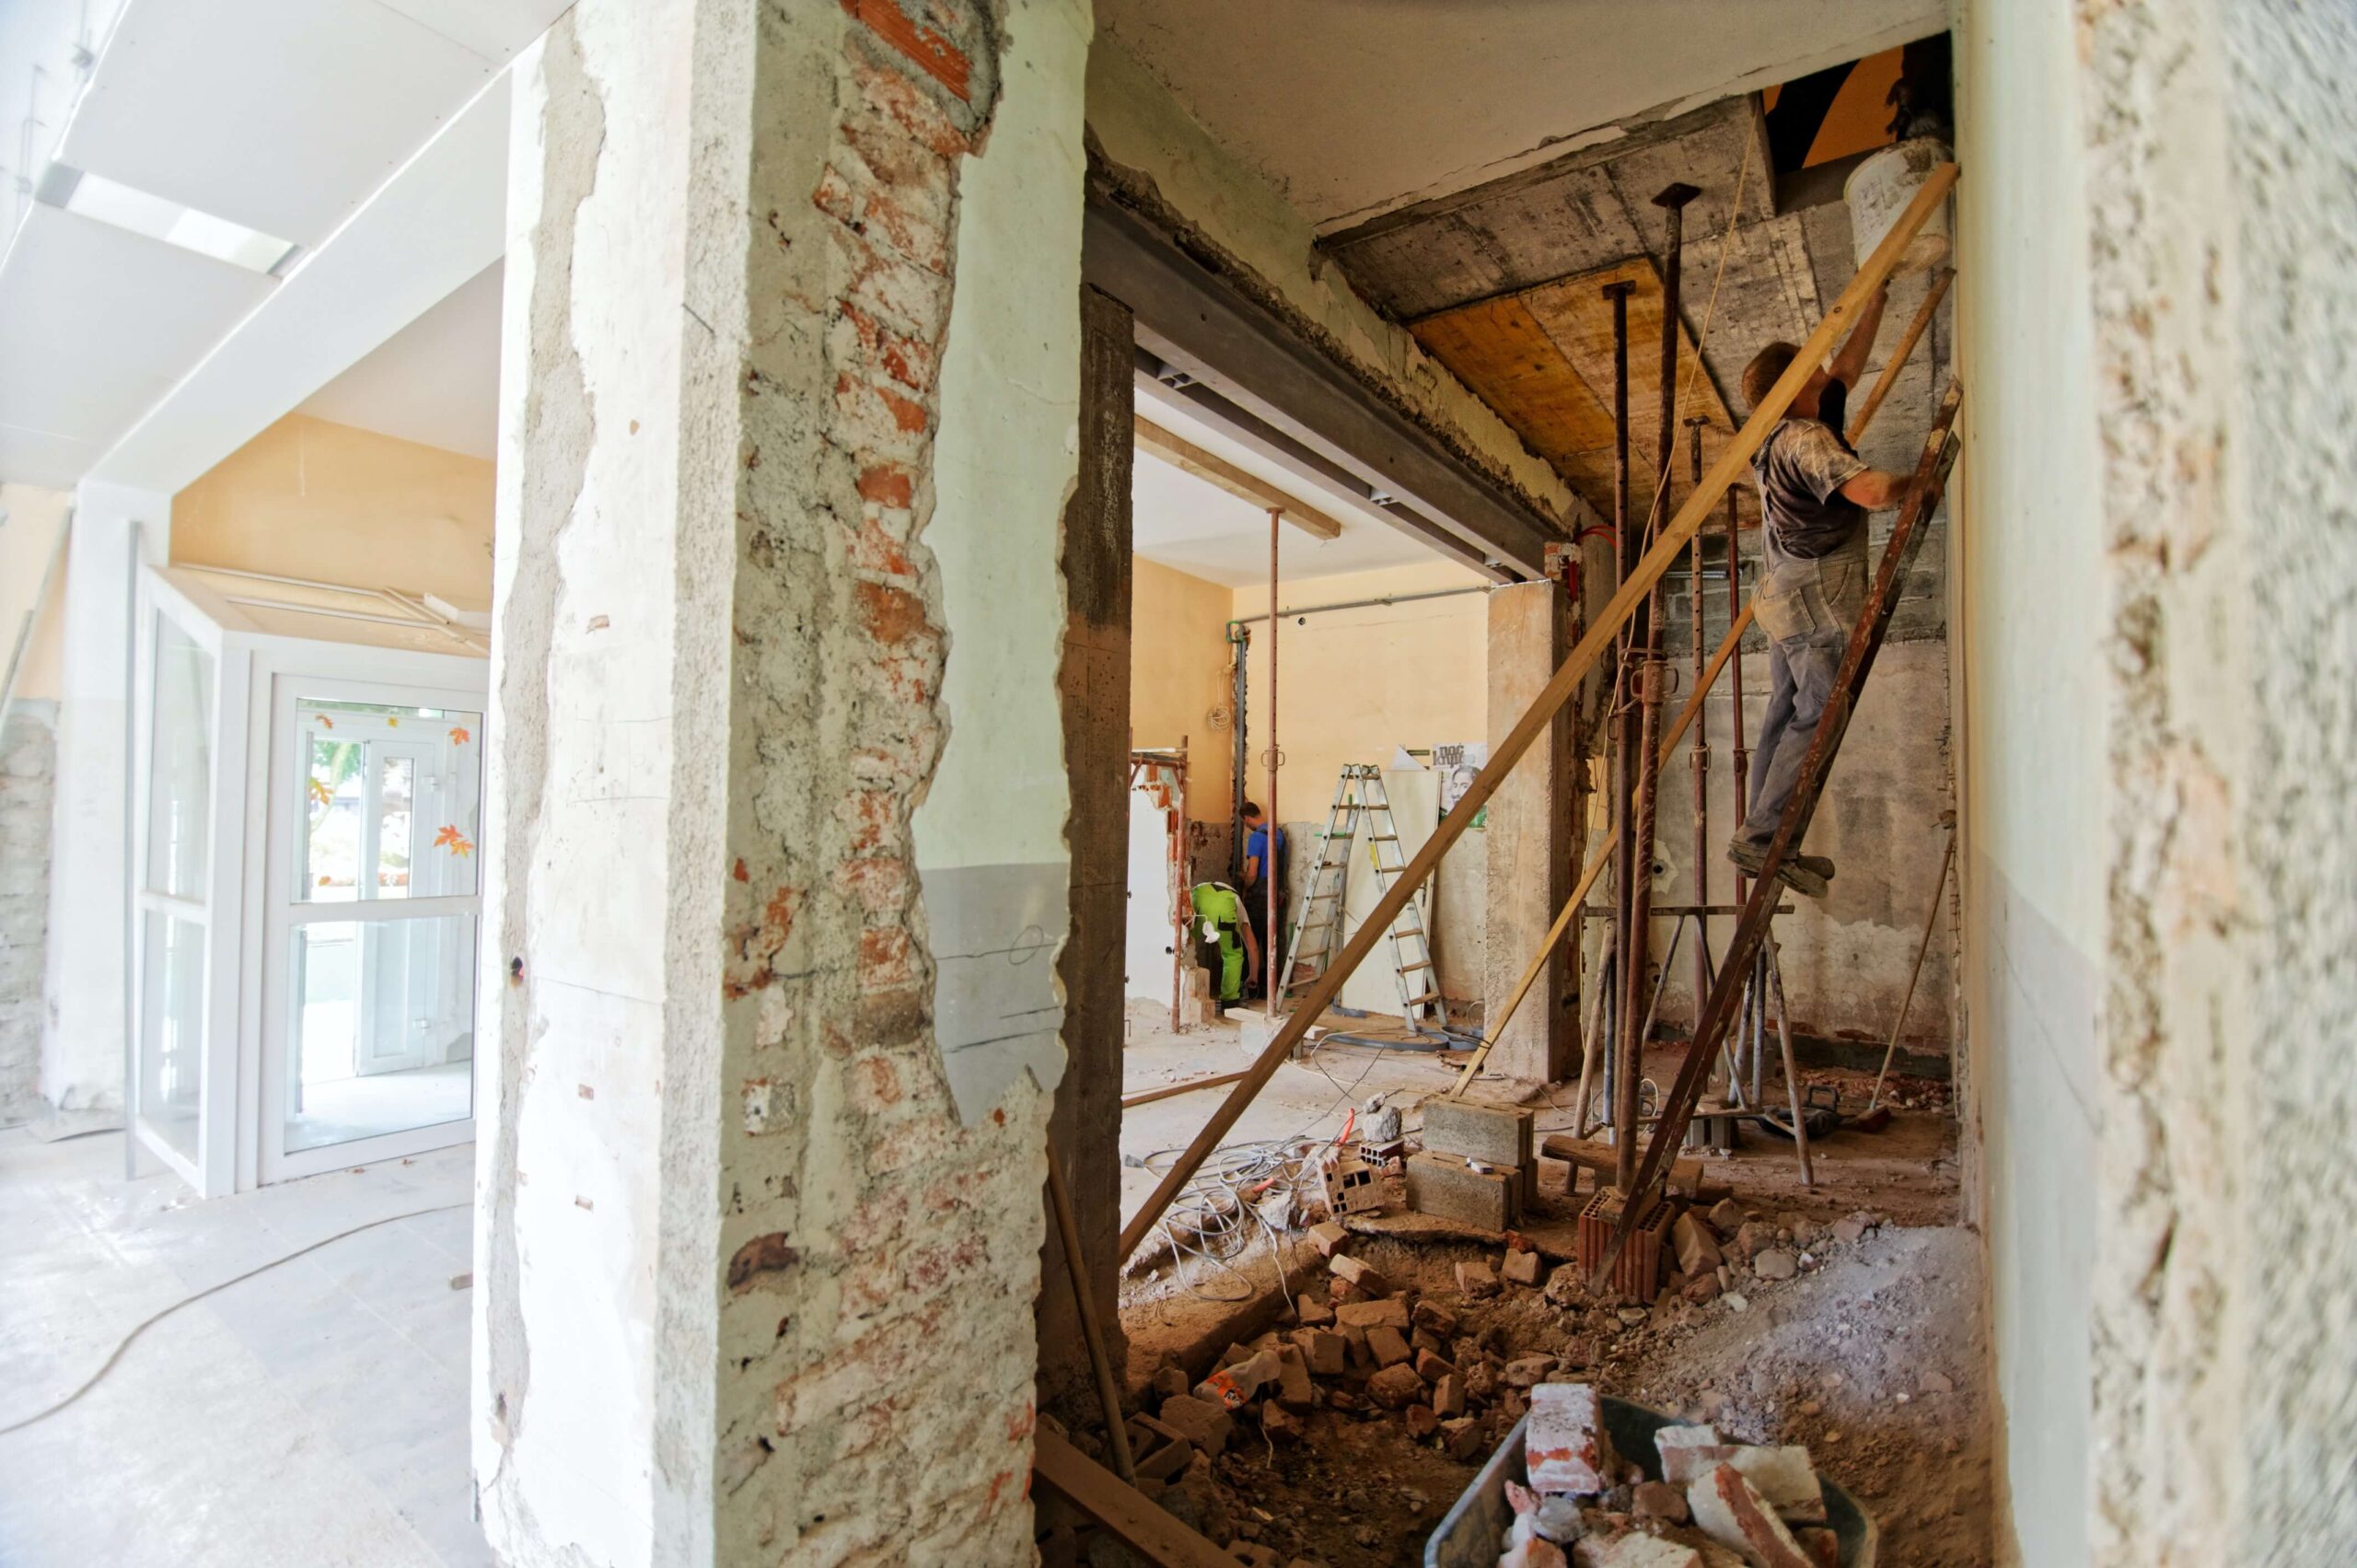 The dos and don'ts of using your home loan for renovations